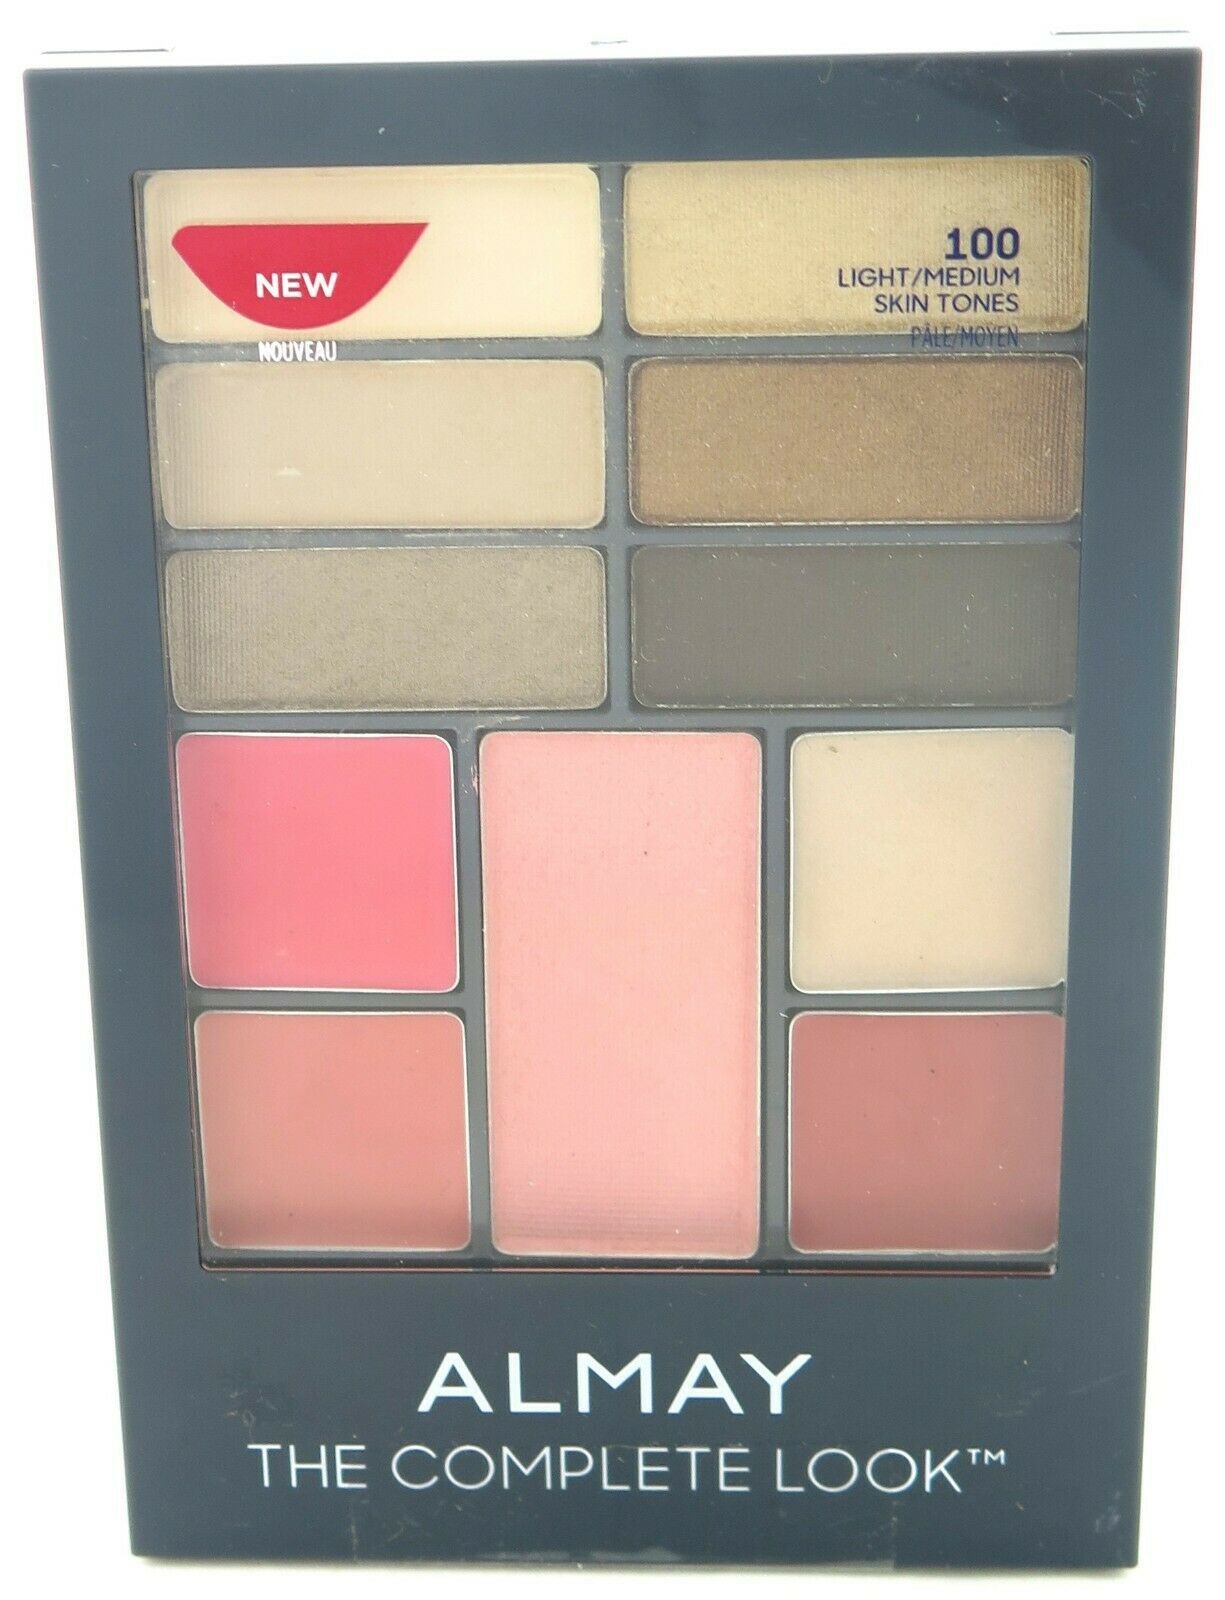 Almay The Complete Look Palette, 100 Light/Medium *Five Pack* - $24.95